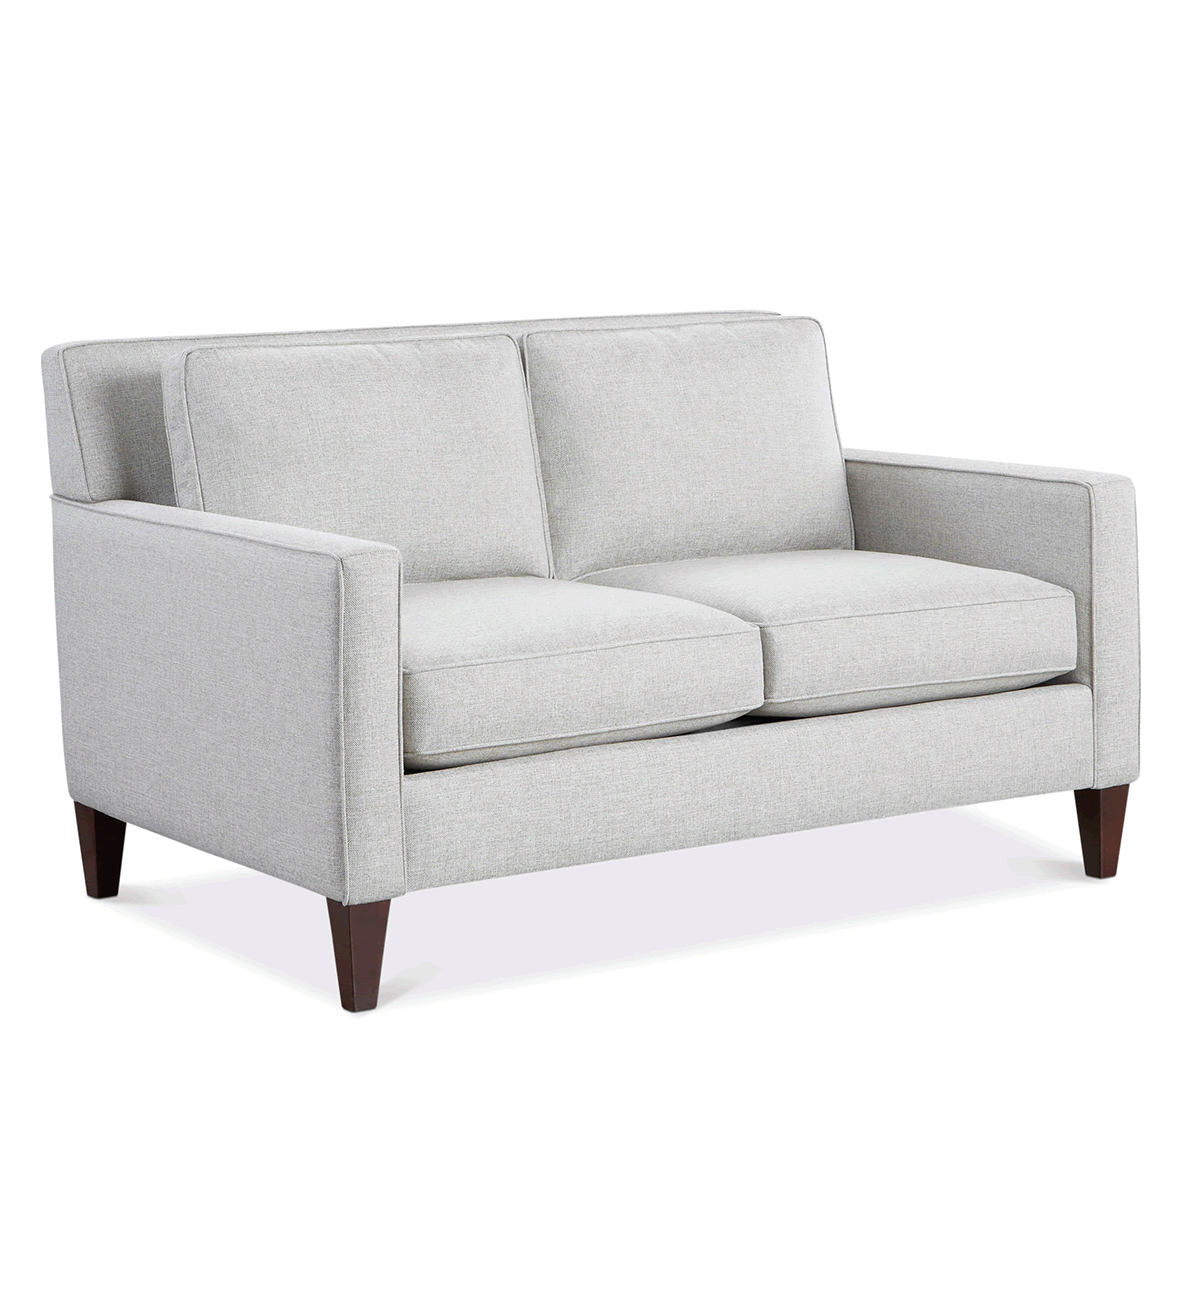 couch clipart loveseat